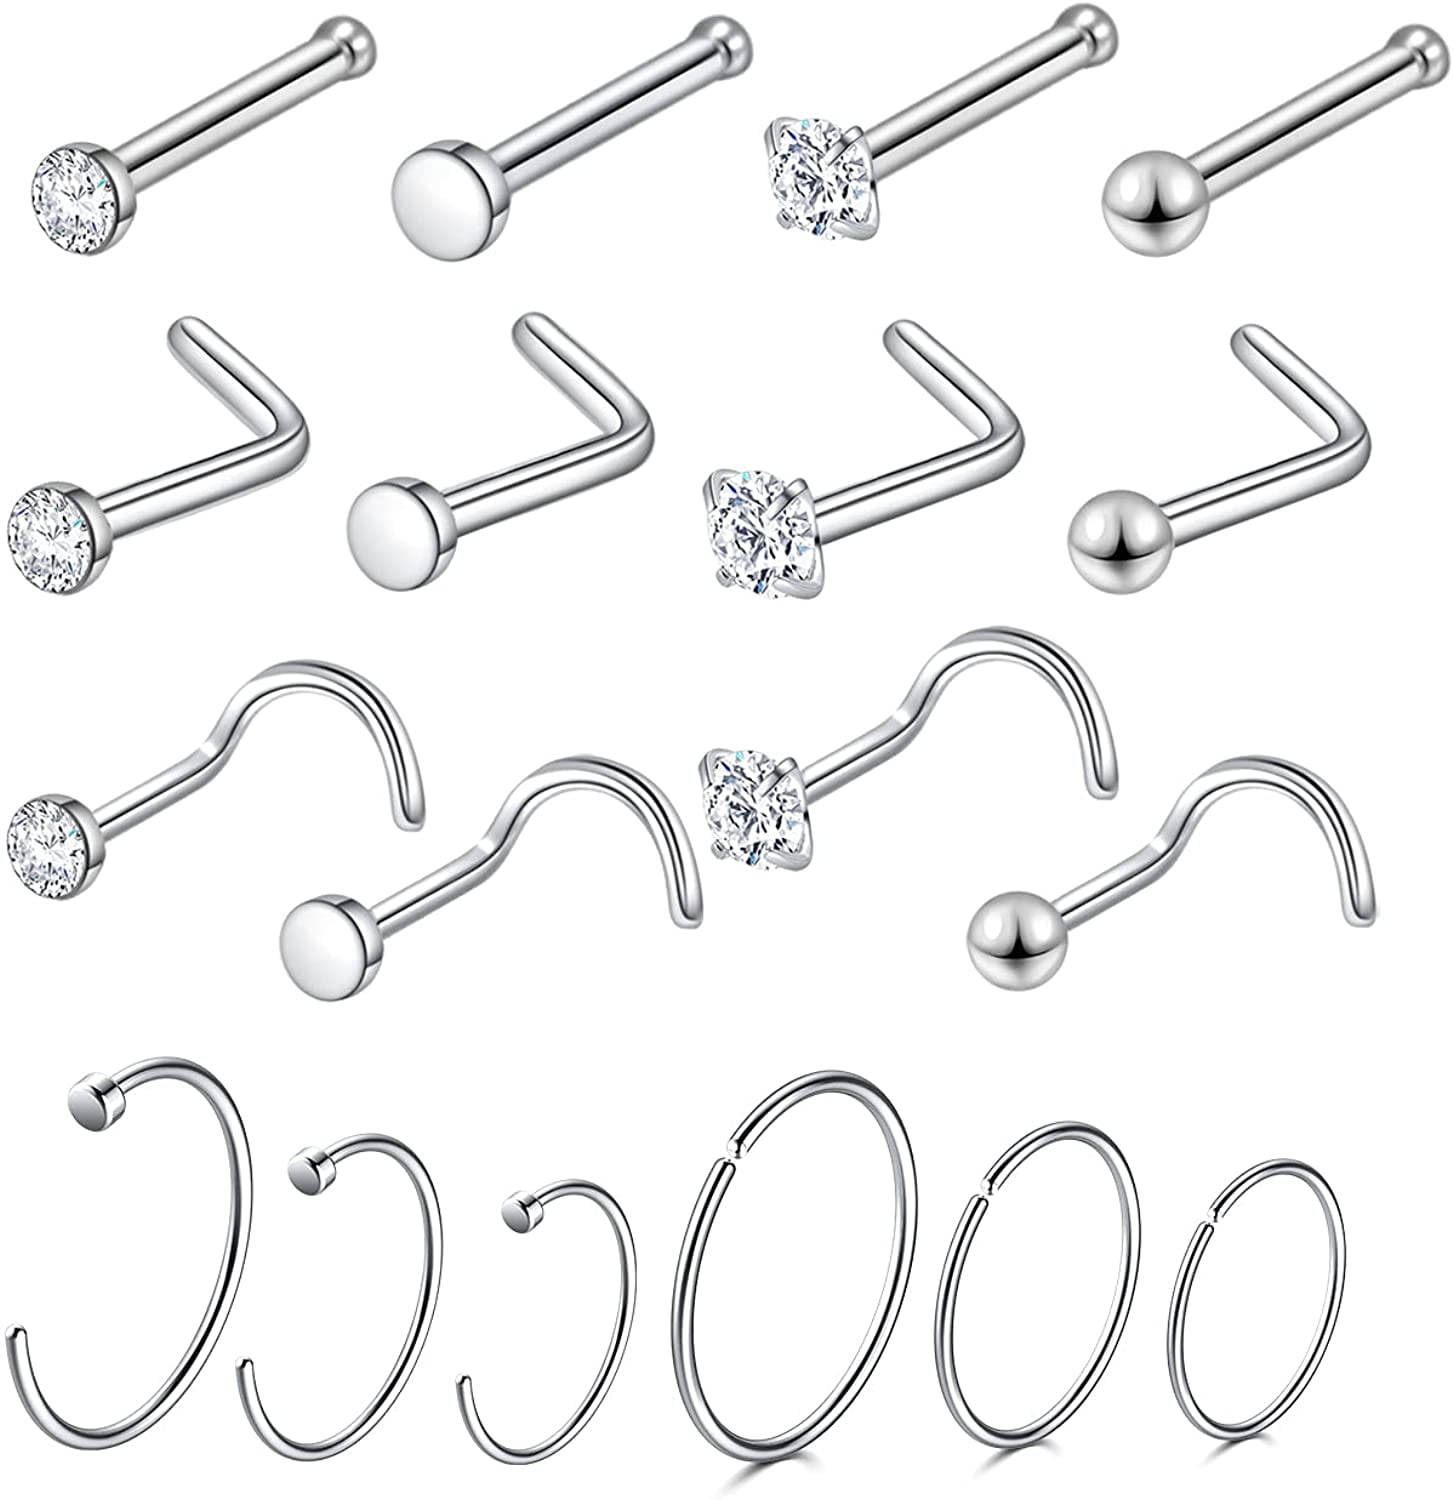 20G Curved Nose Stud Ring L-Shape with Heart Piercing Jewelry Surgical Steel